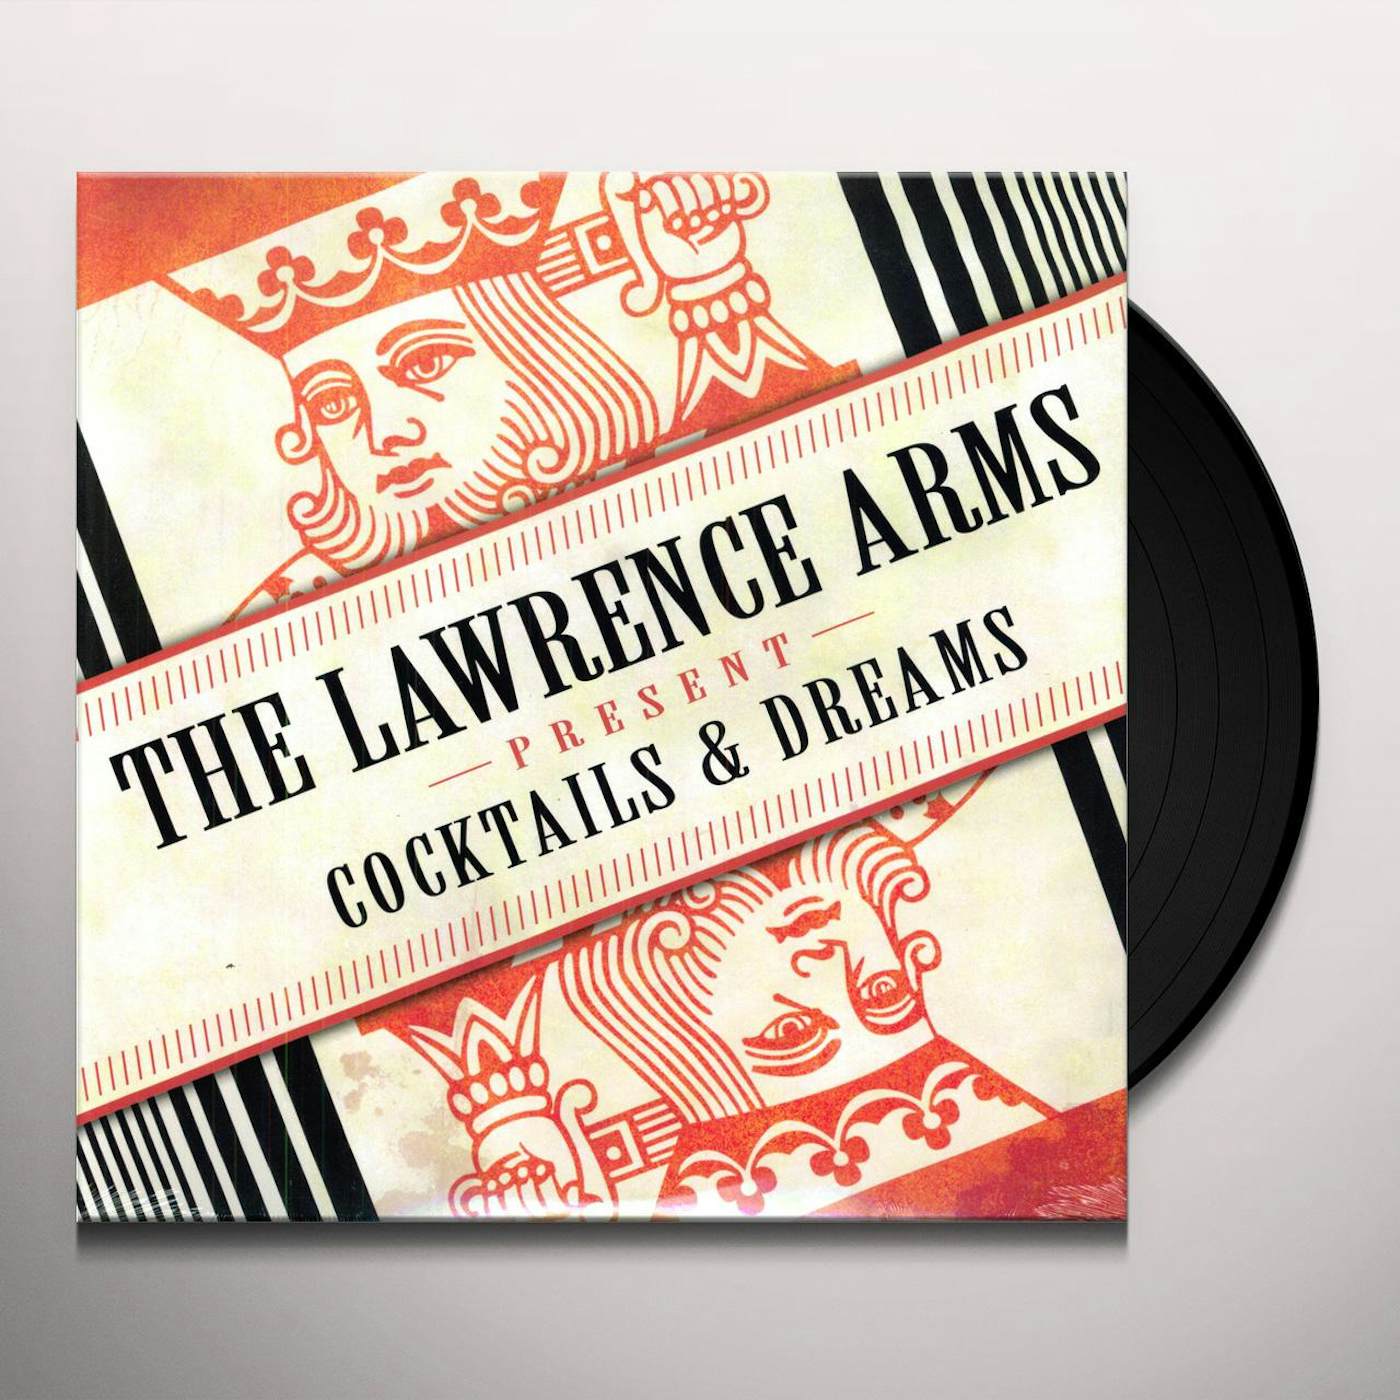 The Lawrence Arms Cocktails & Dreams Vinyl Record